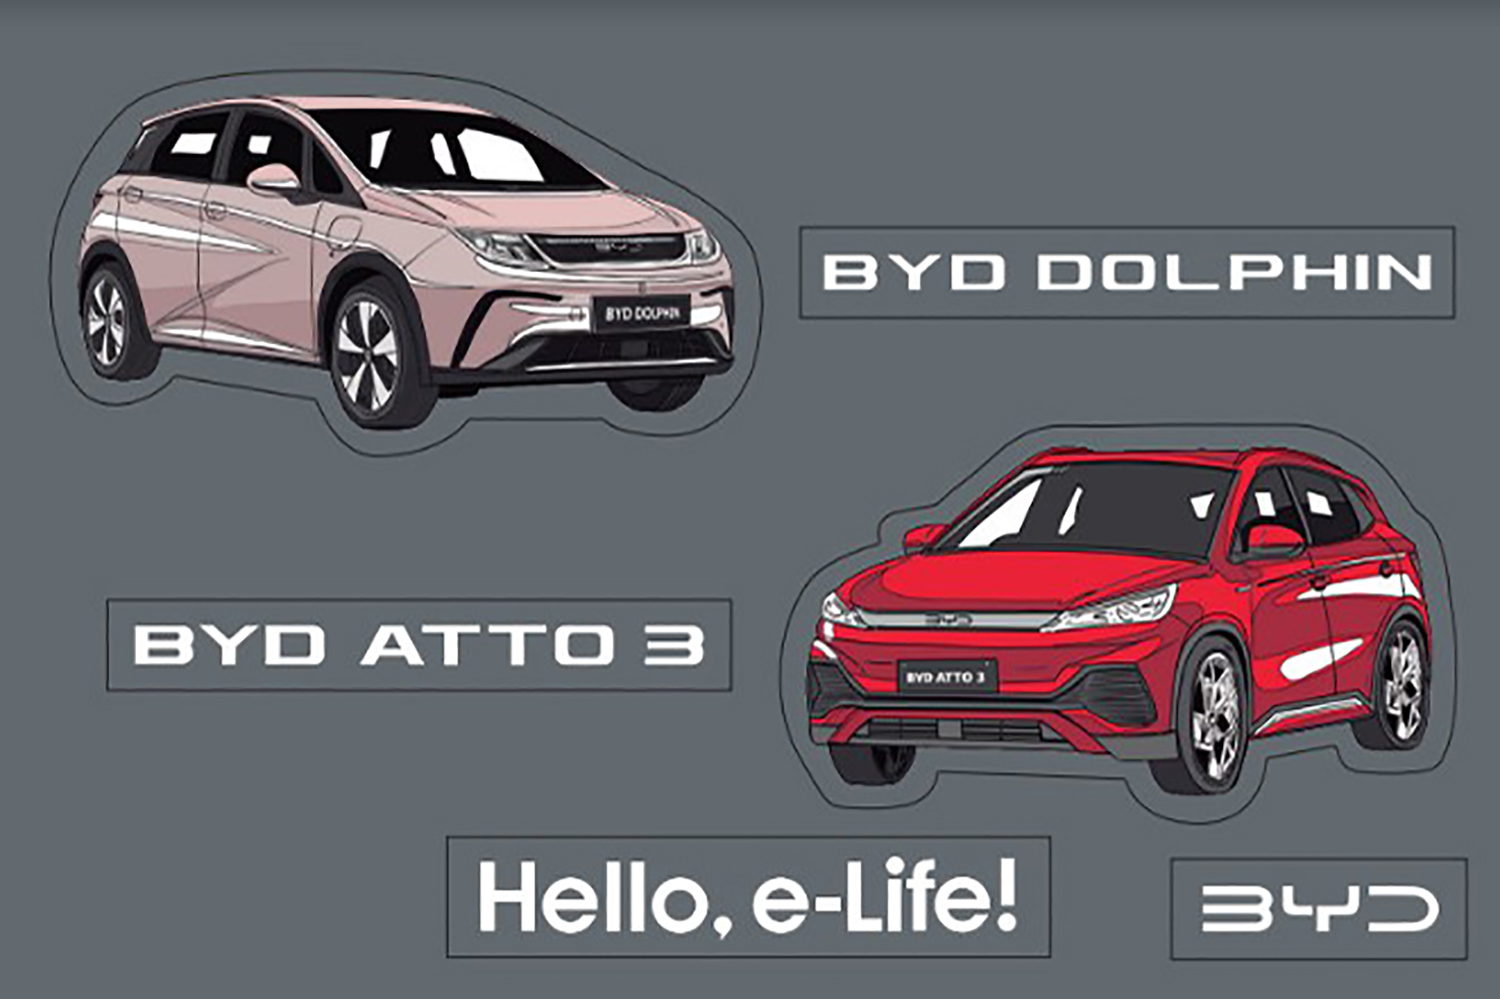 BYD ATTO 3とBYD DOLPHINのイラスト